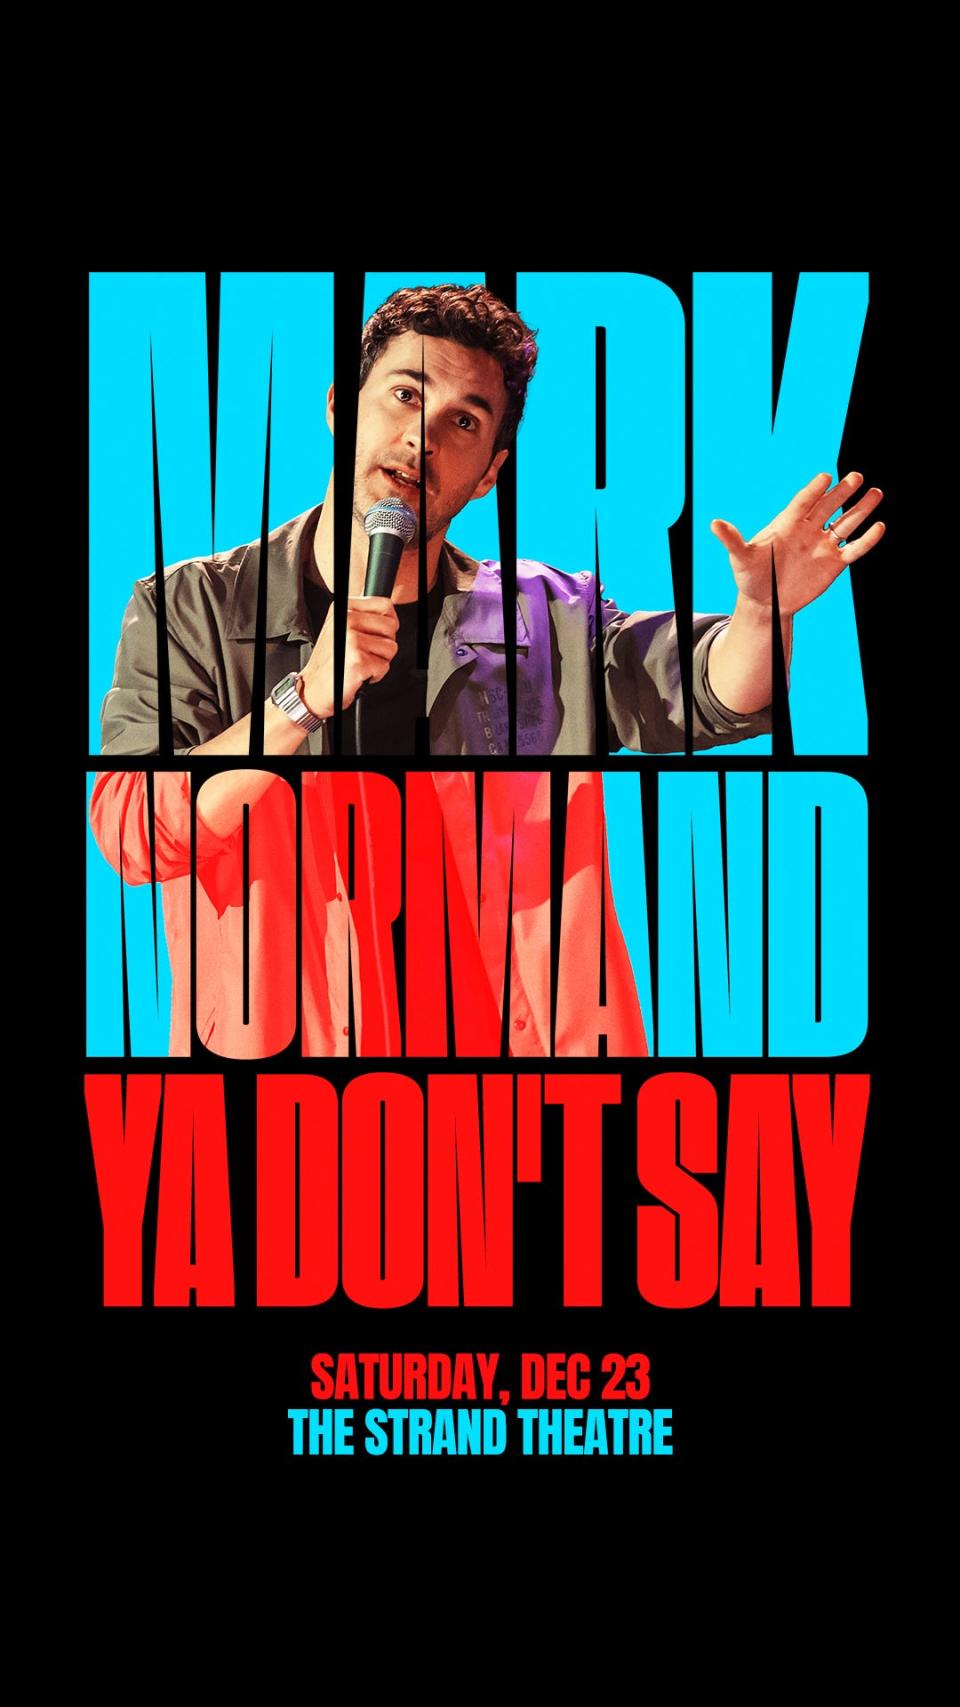 Mark Normand, fresh from his new Netflix Soup to Nuts comedy special, is appearing at the Strand Theatre to bring some levity to your life.